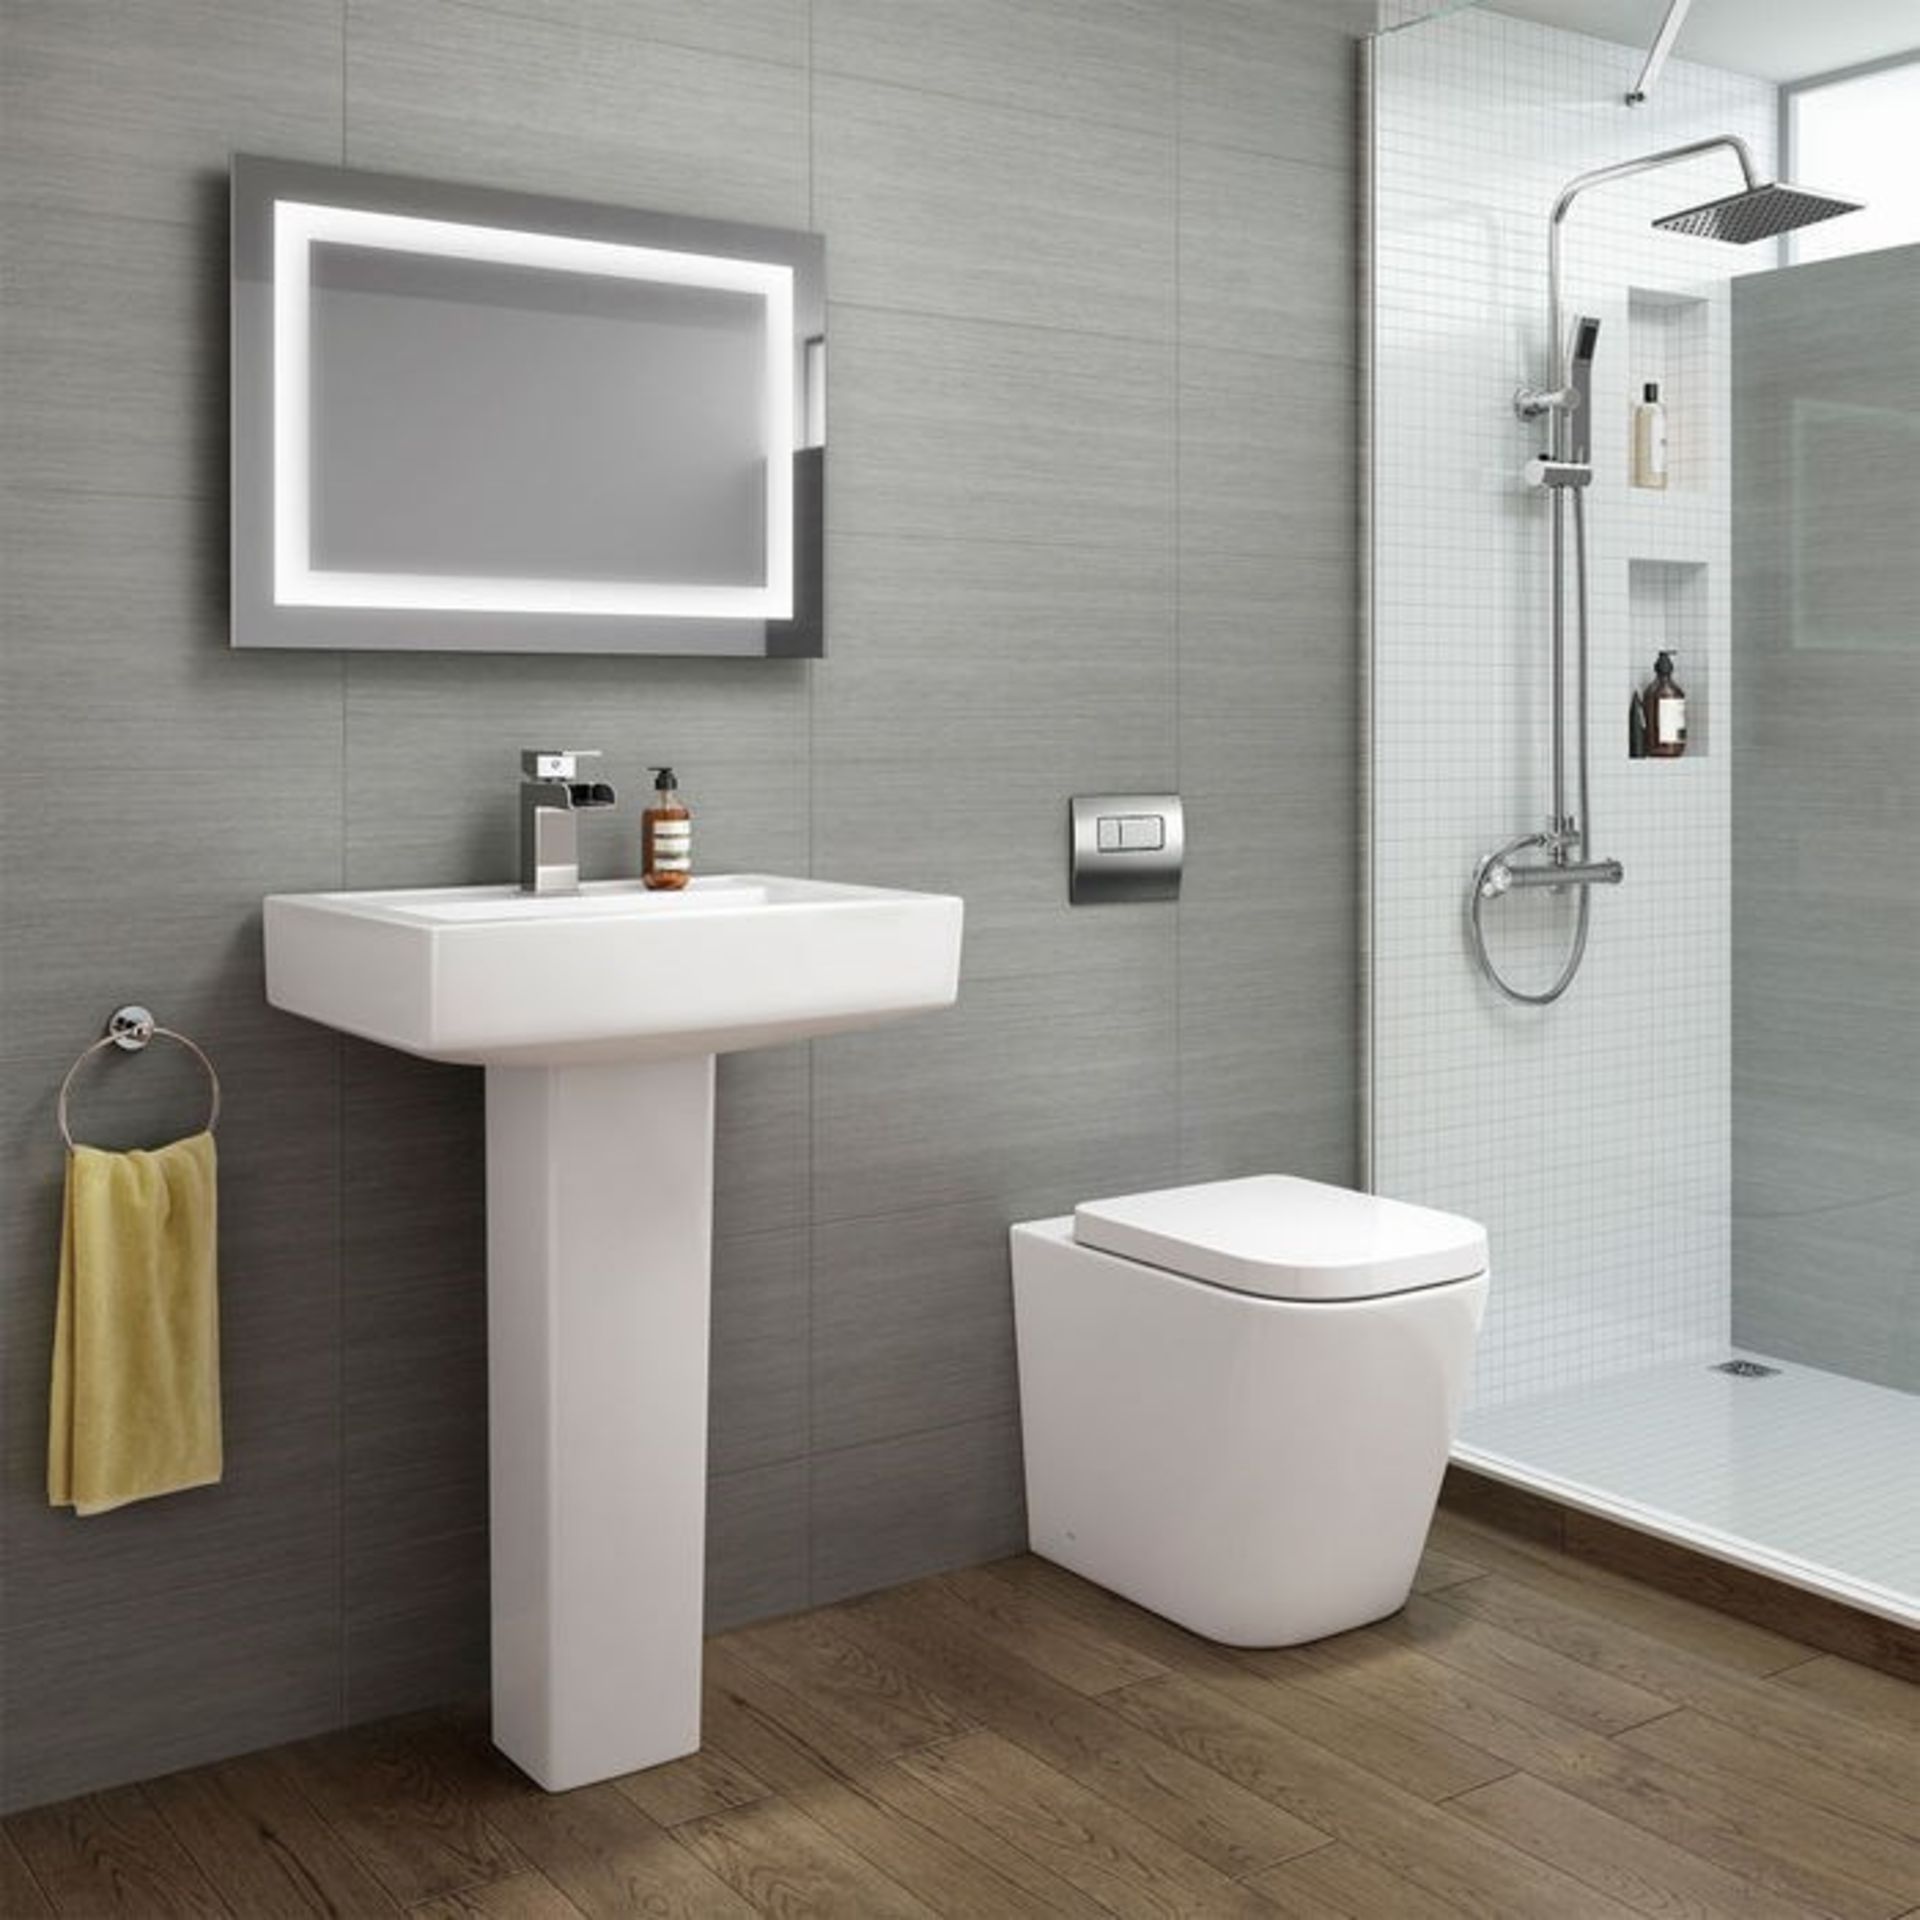 BRAND NEW BOXED Florence Rimless Back to Wall Toilet inc Luxury Soft Close Seat.RRP £349.99 each. - Image 2 of 2